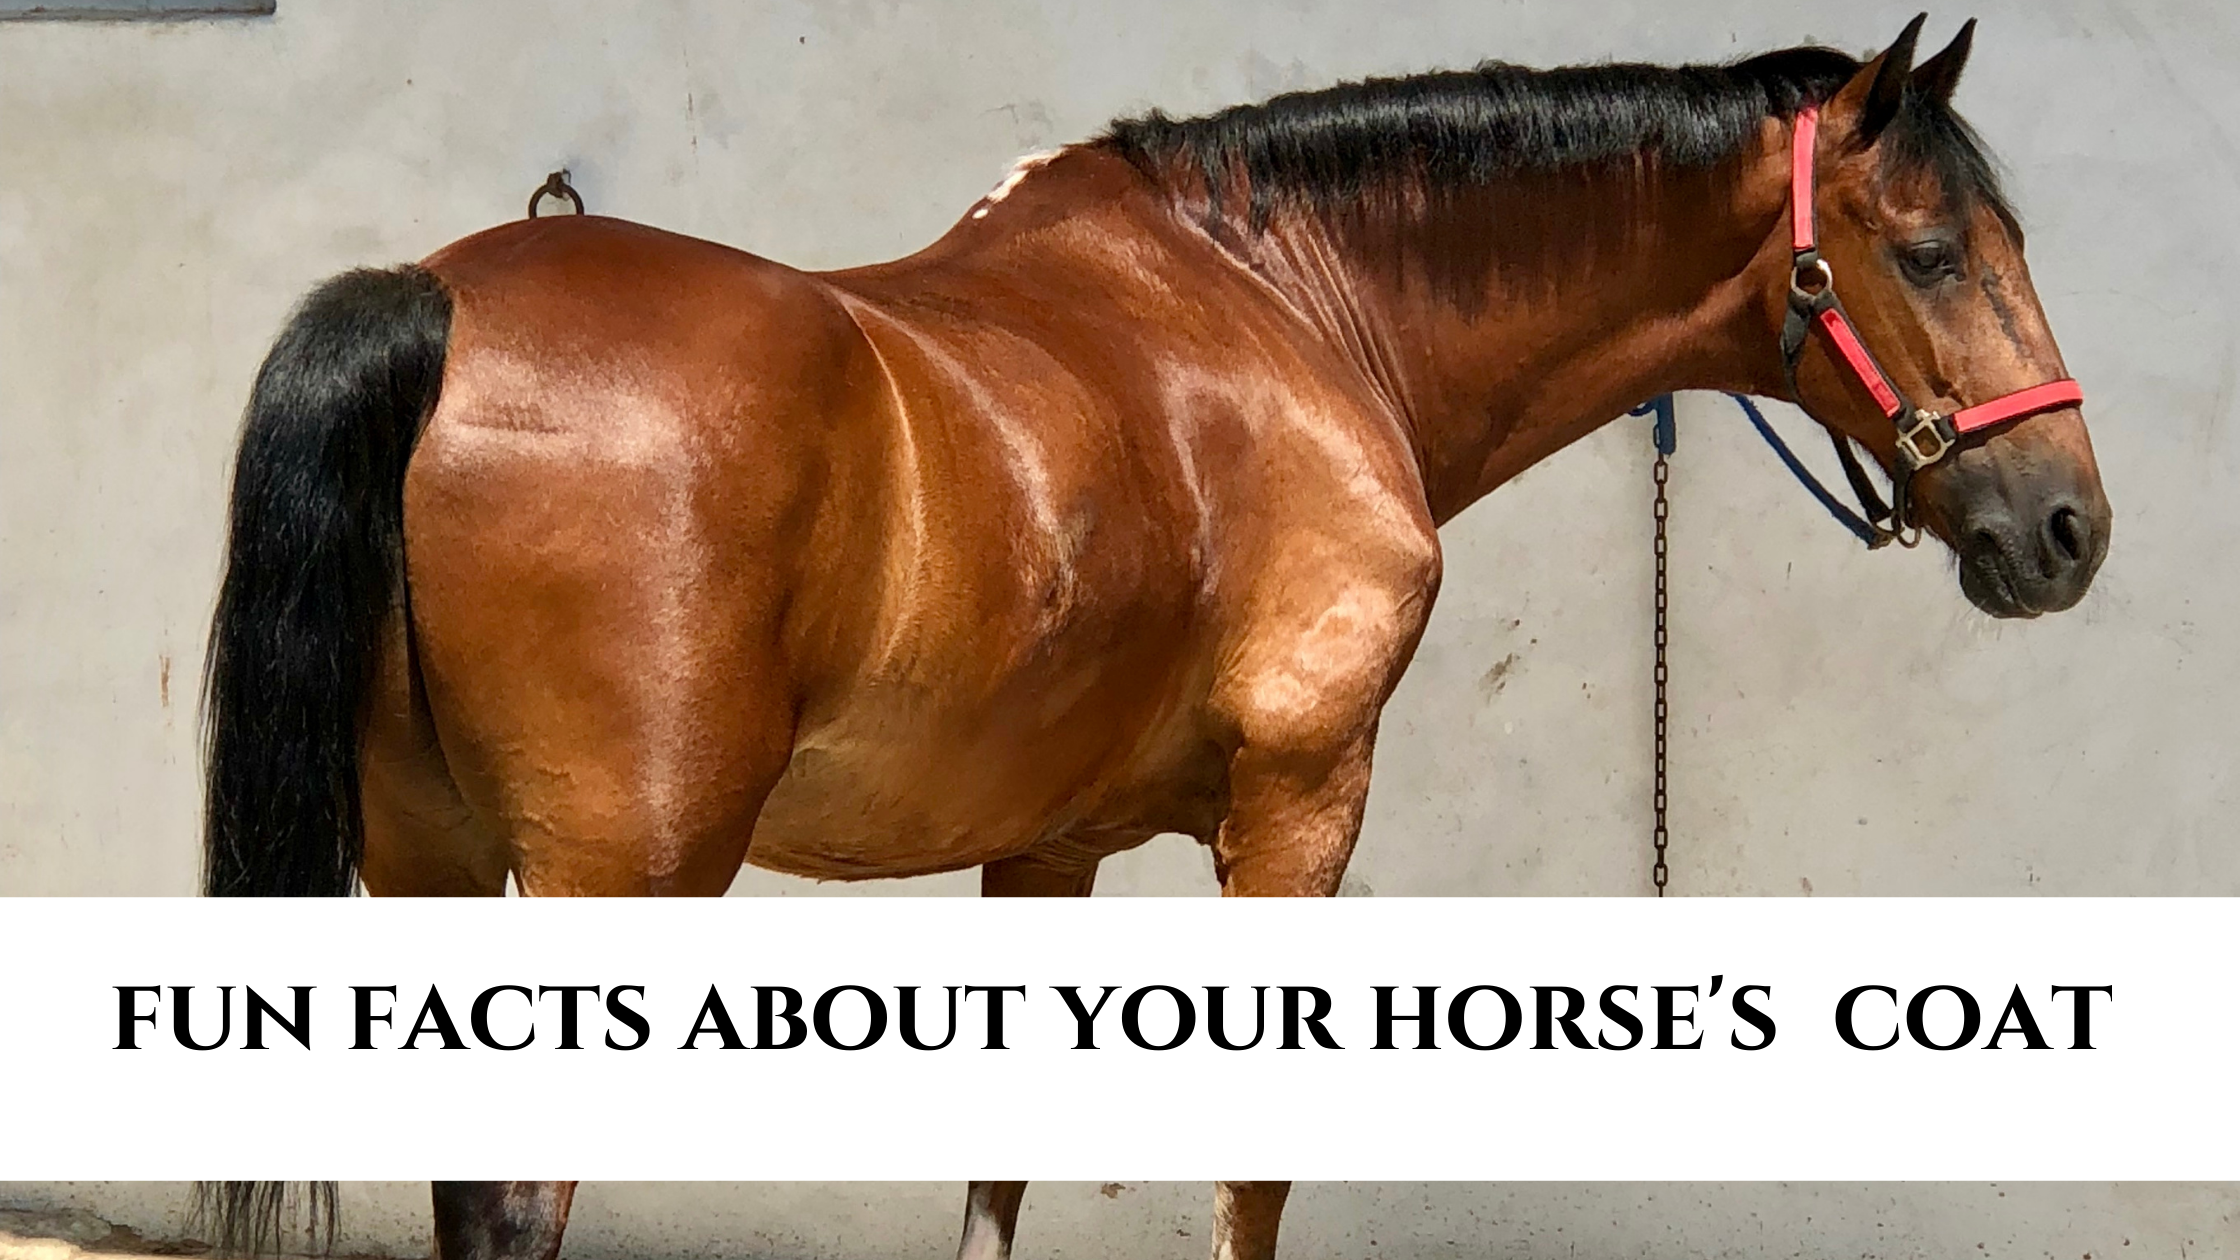 Why Do Horses Have Manes?